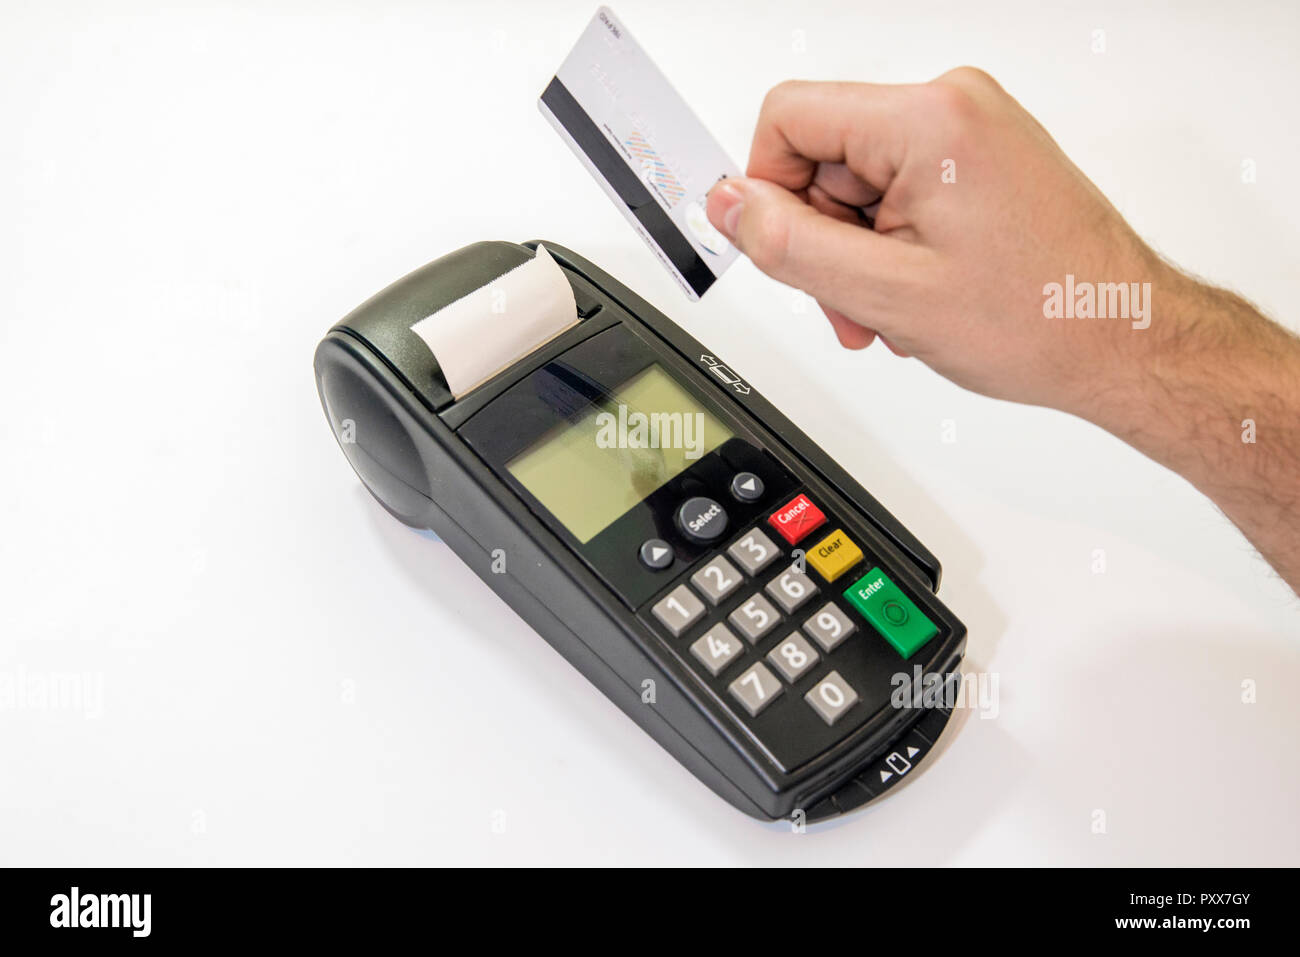 Male hand dials pin code on pin pad of card machine or pos terminal with inserted blank white credit card isolated on white background. Payment with c Stock Photo